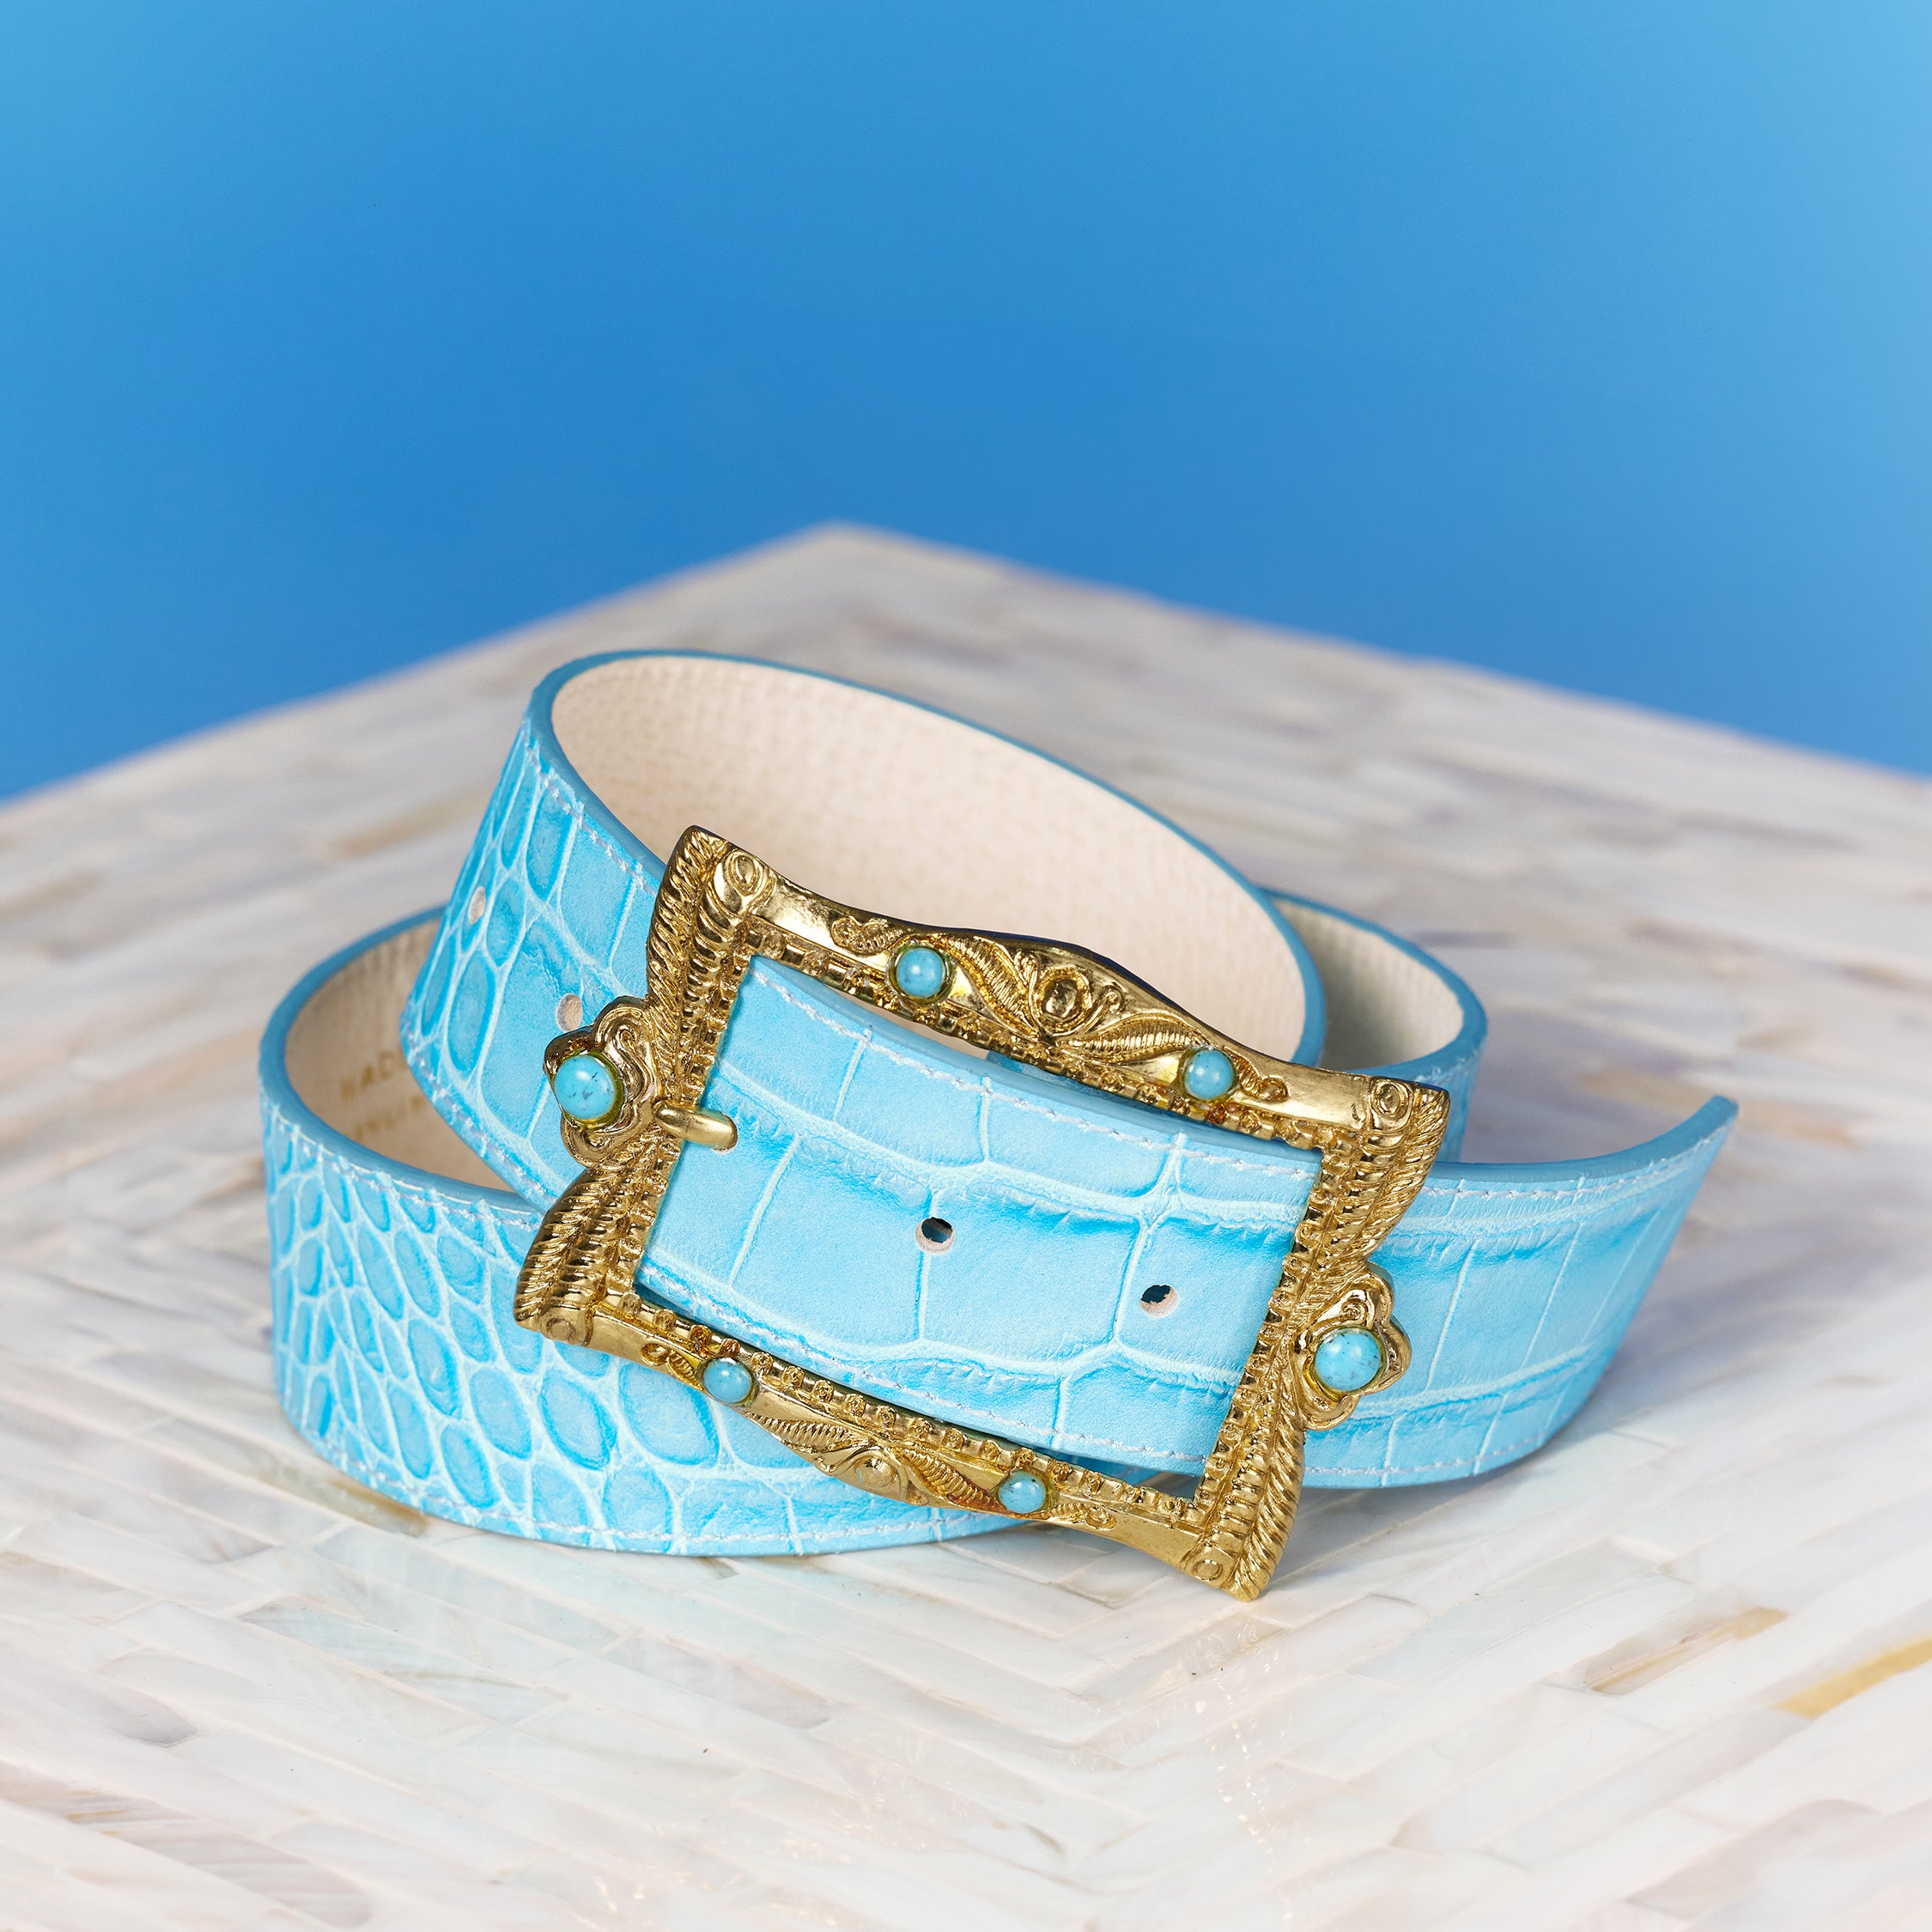 Blair Belt designed by NicoBlu and hand-crafted in Italy